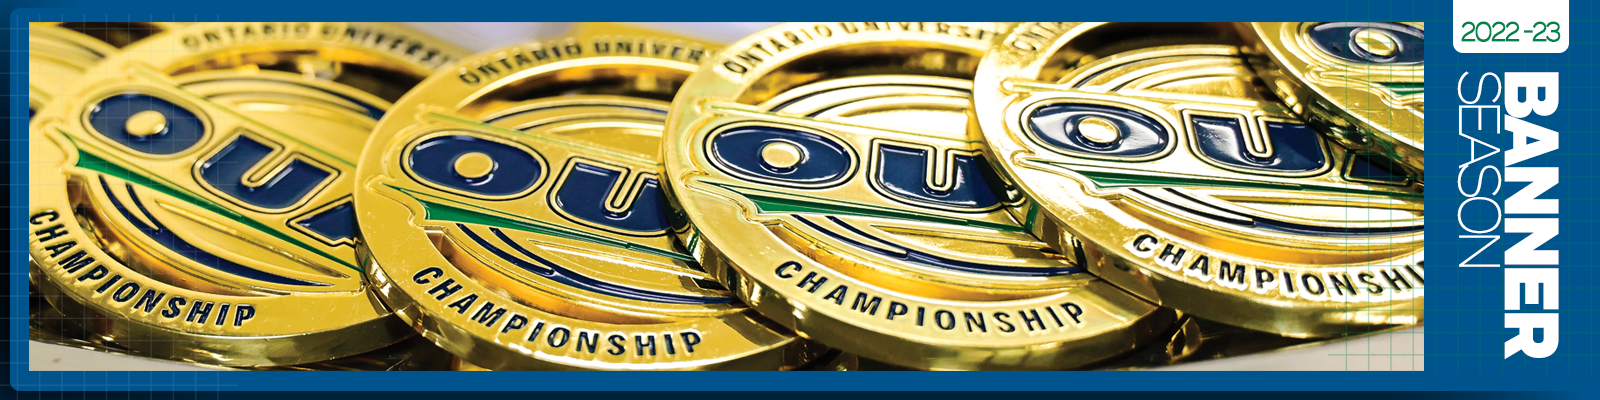 Graphic with blue background, covered predominantly by photo of overlapping OUA gold medals, with additional white text on the right side that reads '2022-23 Banner Season'